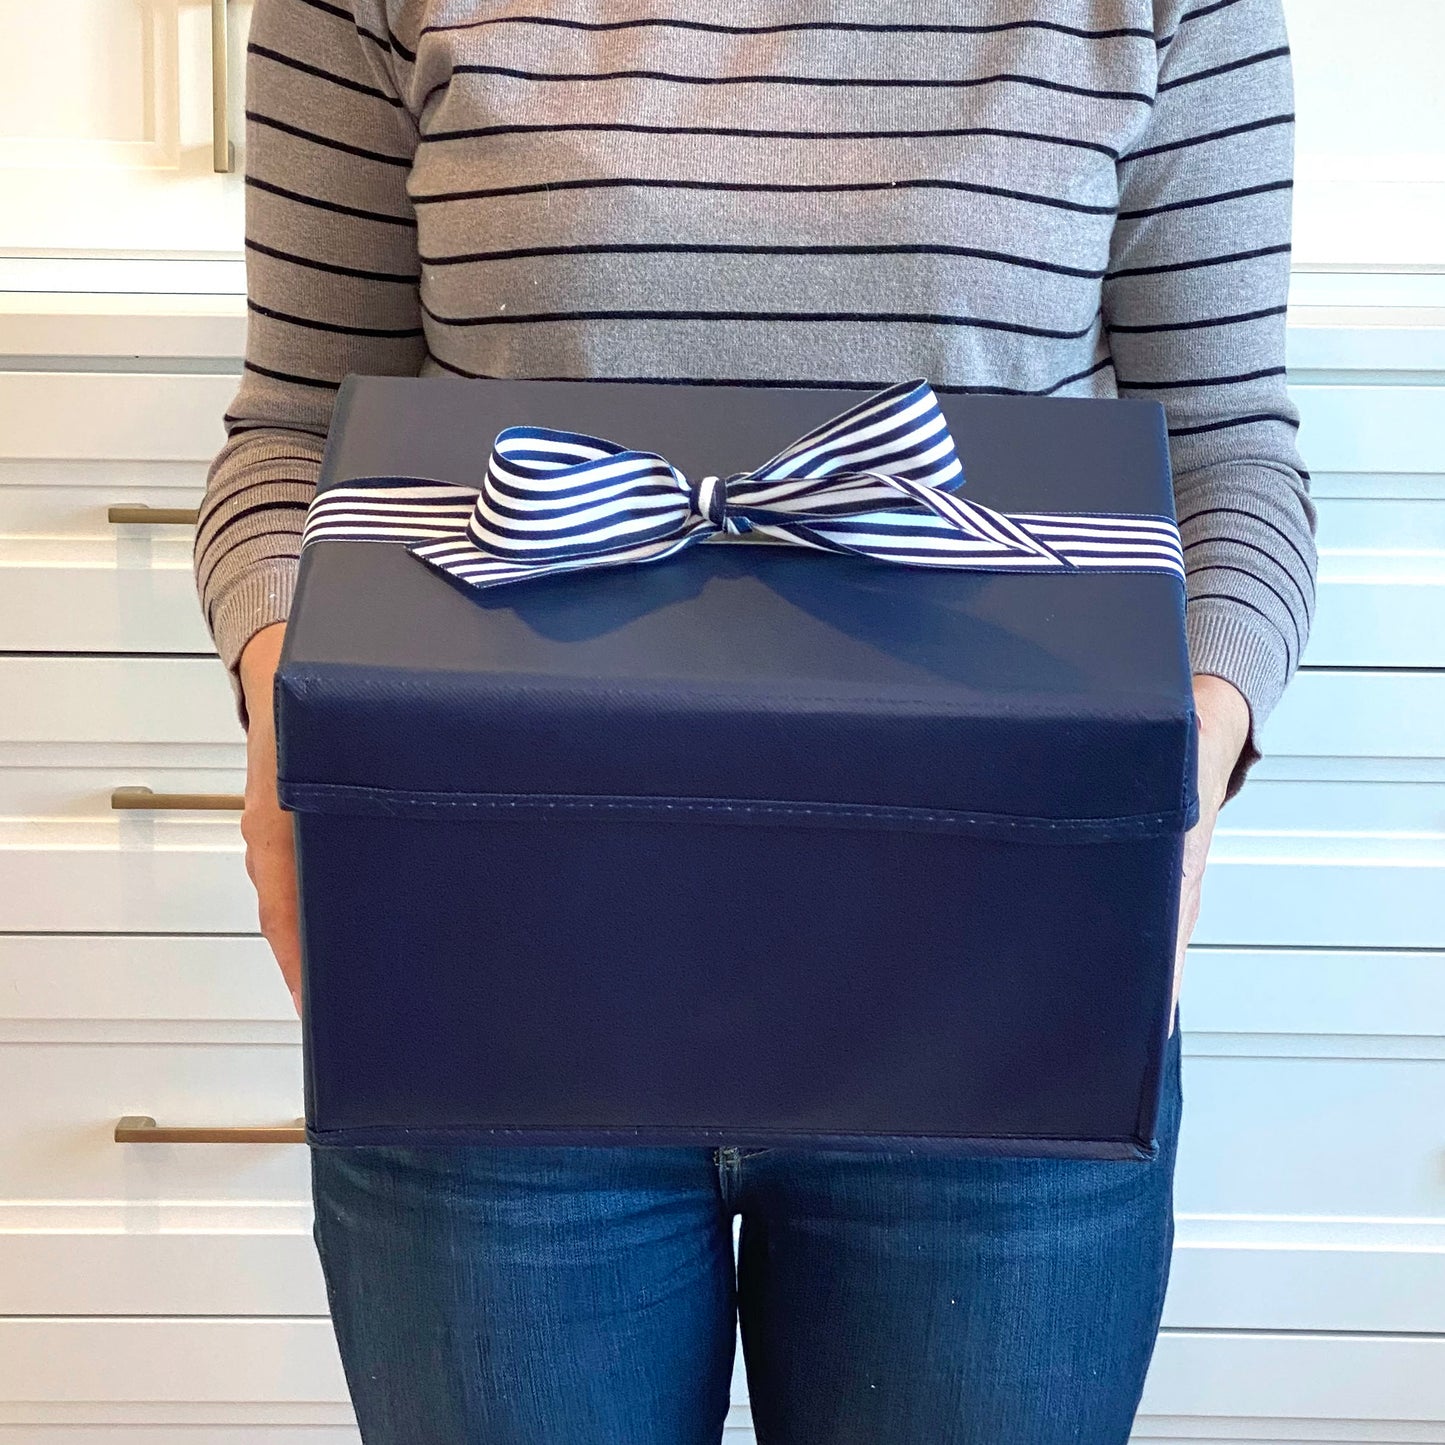 Small Shoebox-Sized Blue Collapsible Gift Box with ribbon attached, great zero waste solution for sustainable and eco-friendly gift boxes